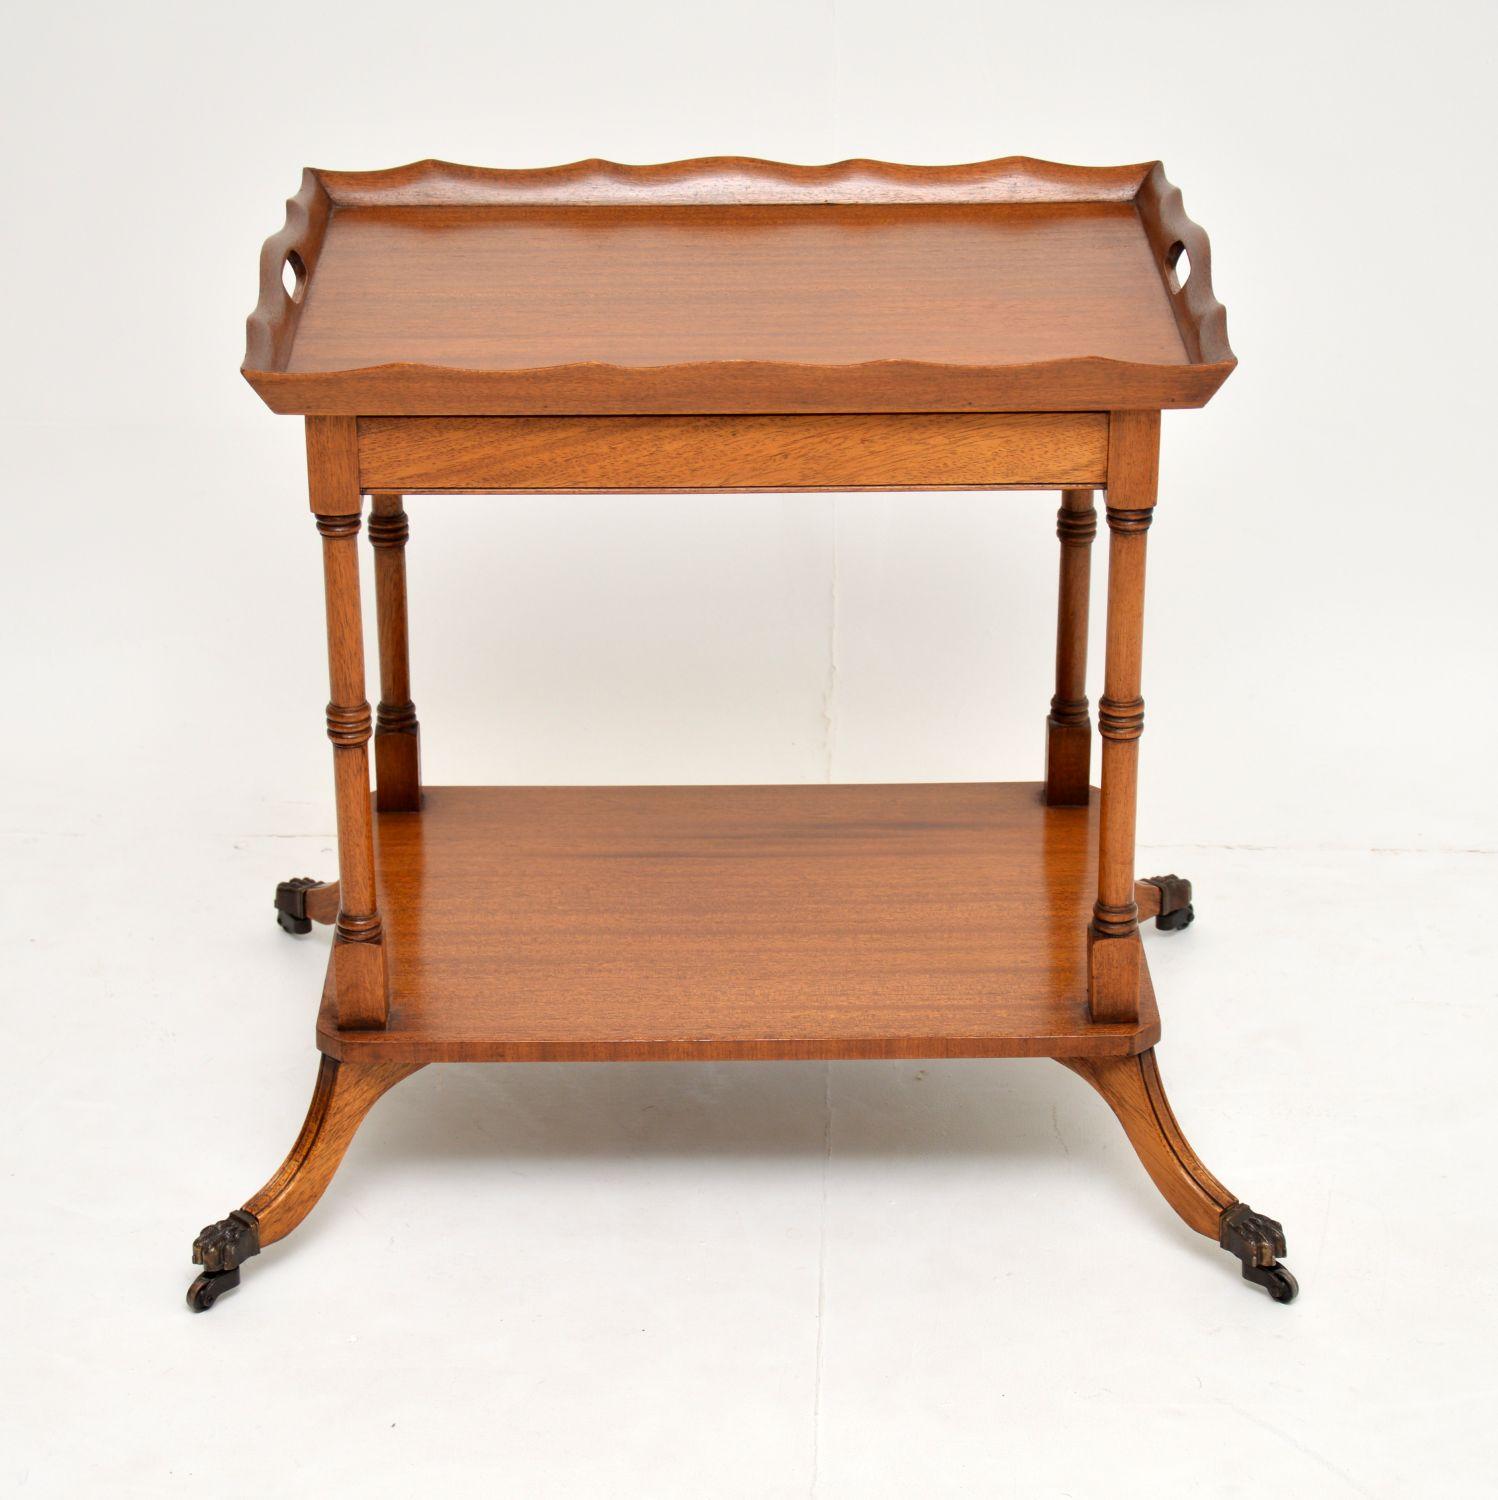 Antique Regency style mahogany tray top side table or trolley in excellent condition and dating from circa 1930s period.

This is a very useful piece, because the tray top can be lifted off for serving food or drinks on. Underneath the tray is a